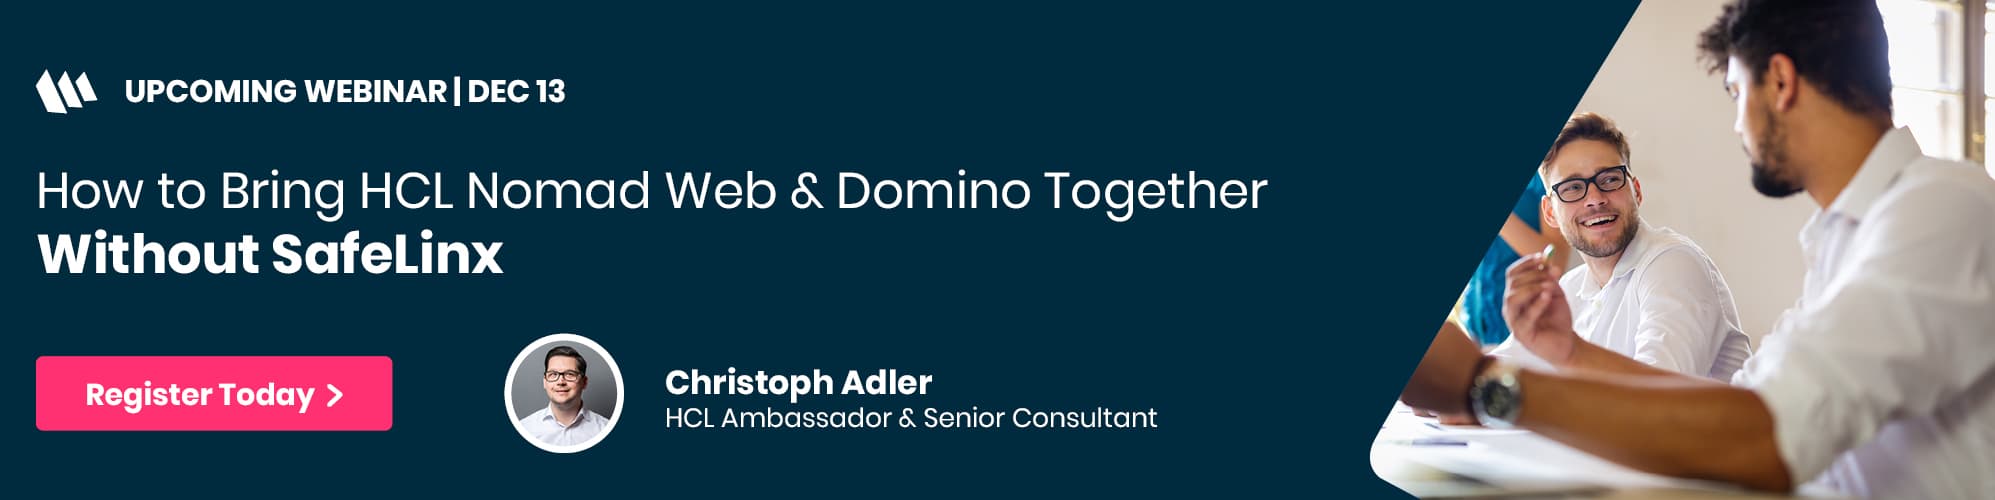 How to Bring HCL Nomad Web & Domino Together Without SafeLinx Webinar